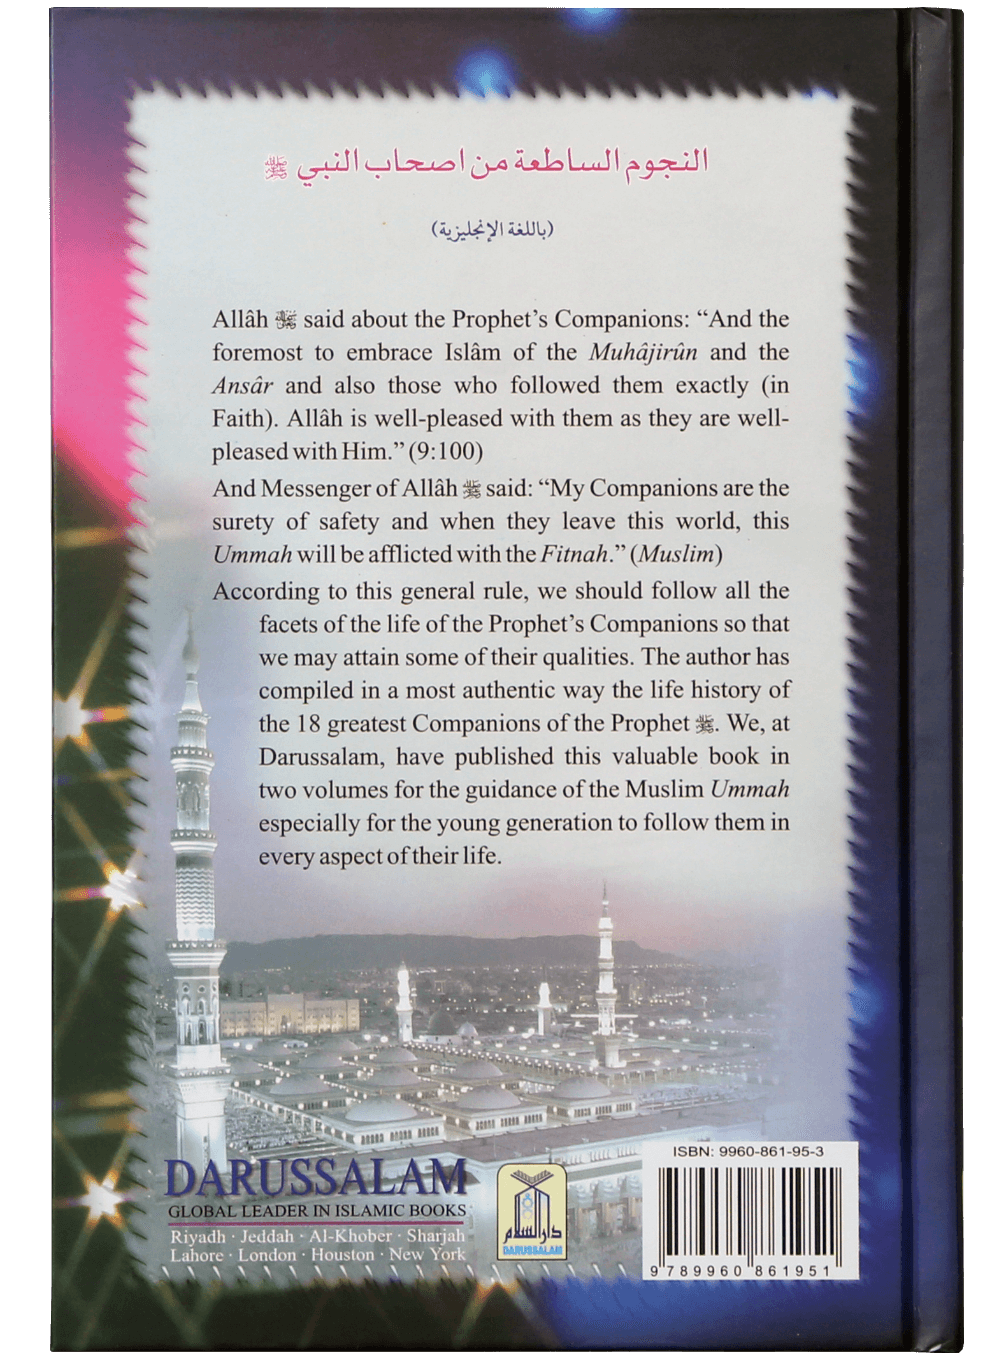 darussalam-2017-10-03-09-39-38shining-stars-among-the-prophets-companions-(5)